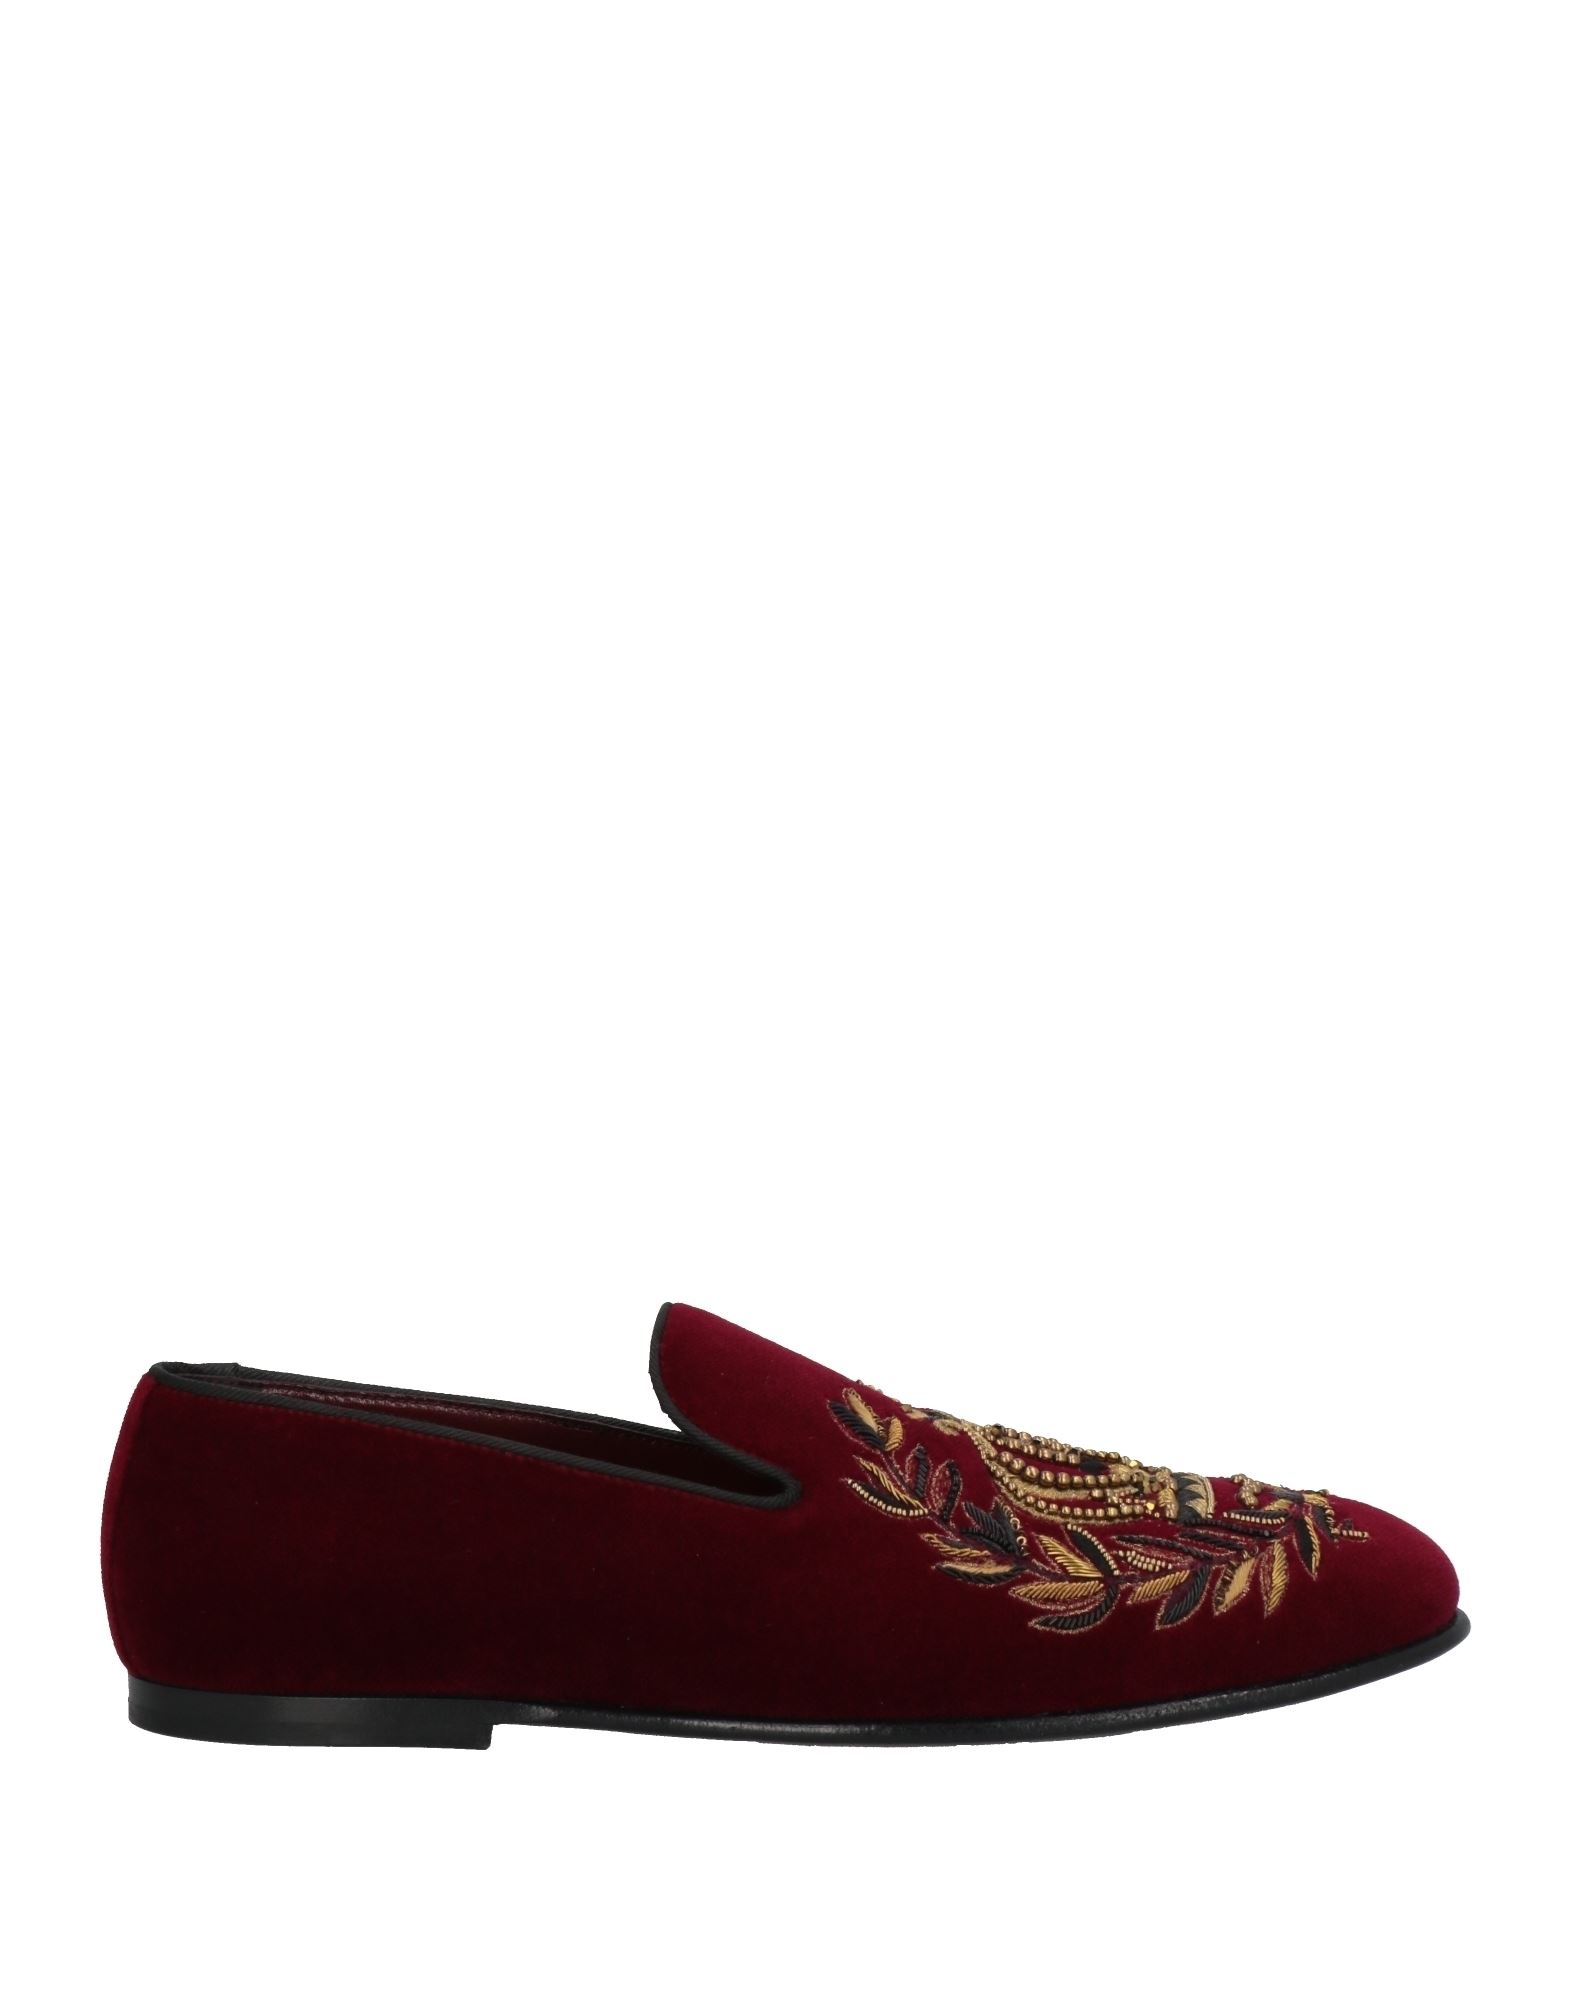 Dolce & Gabbana Man Loafers Burgundy Size 7 Cotton In Red